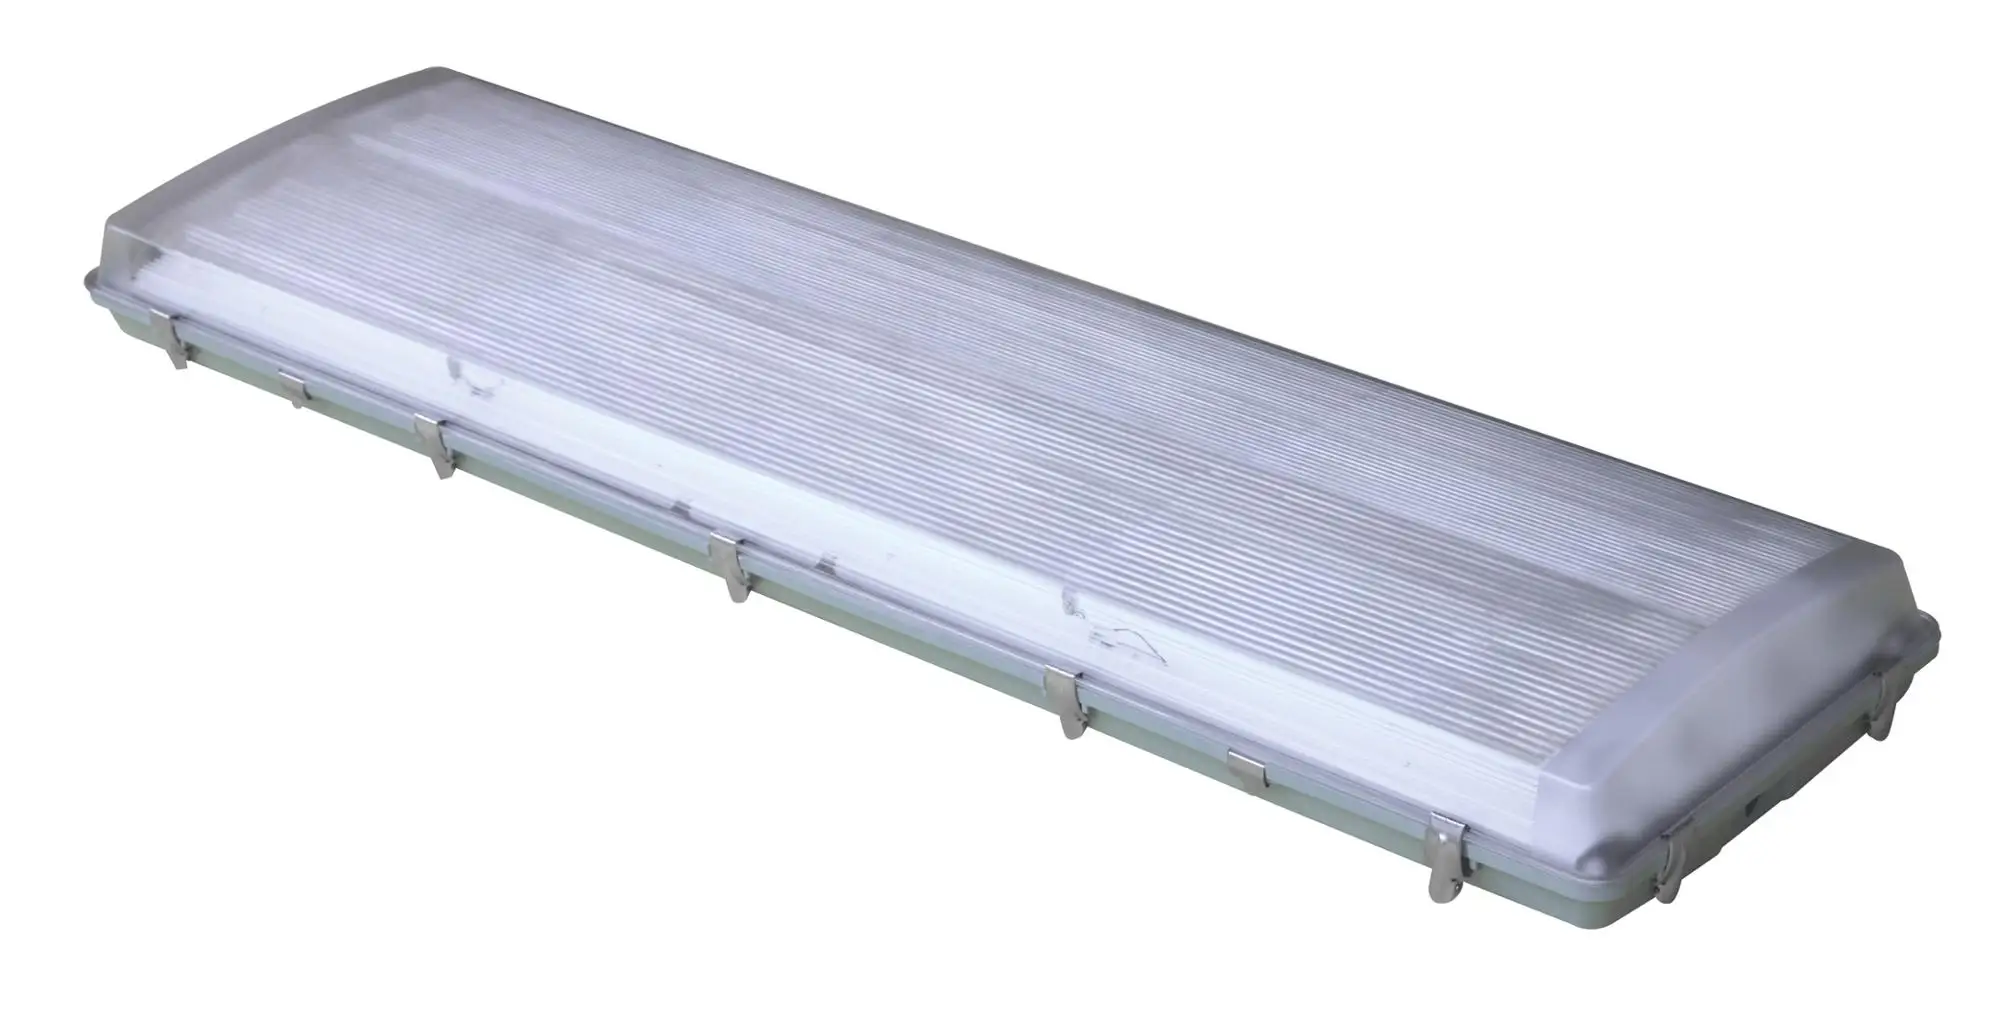 China Factory export waterproof light fixture without T8 fluorescent tube